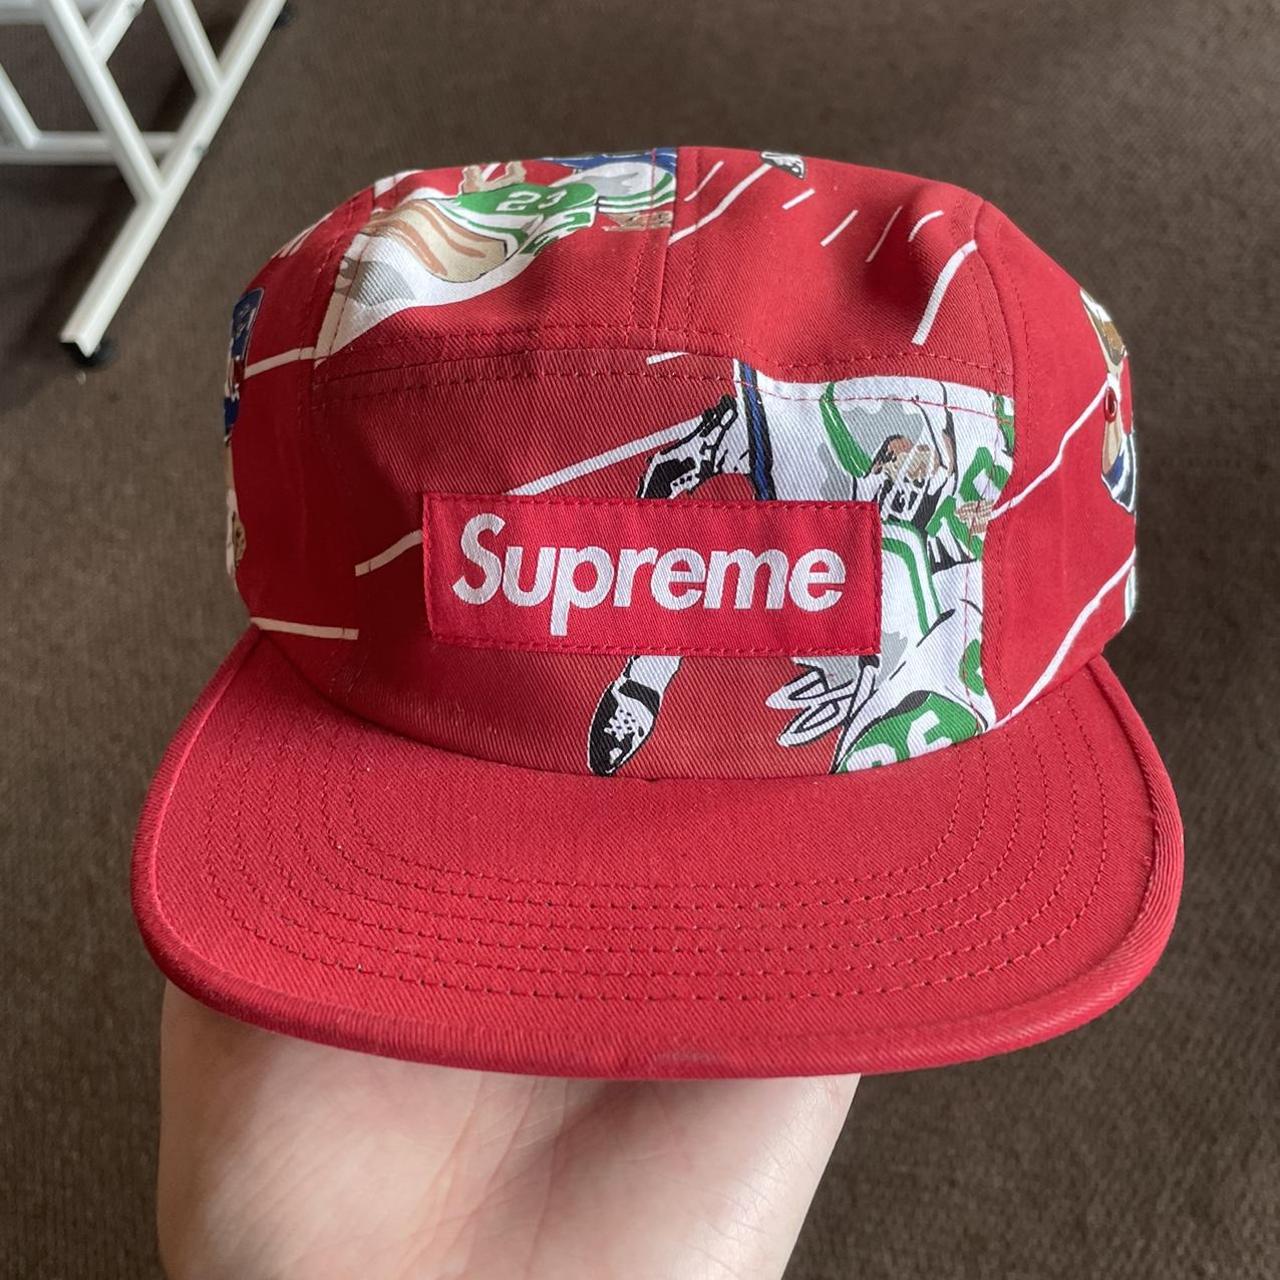 Supreme 2013 Football Camp Cap Red Color One Size...